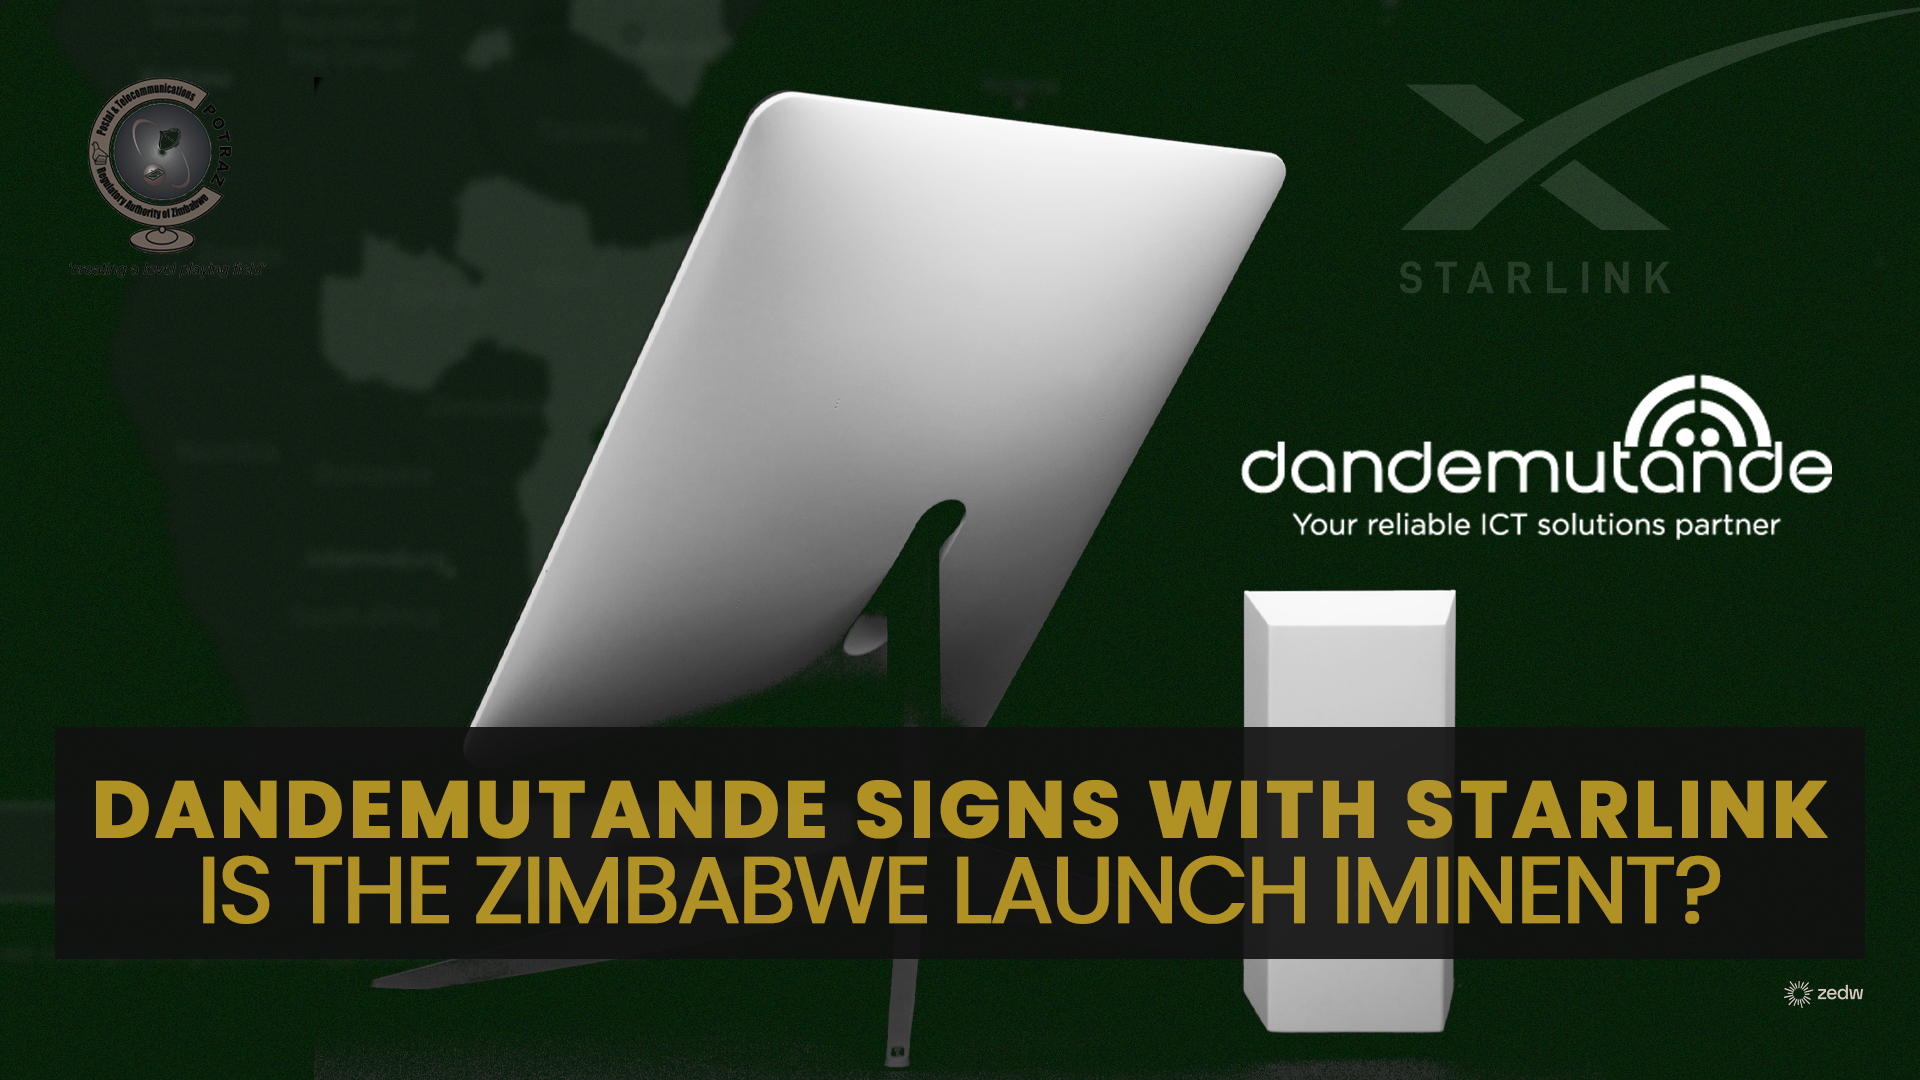 Dandemutande has signed an agreement with Starlink to be a reseller of the service in Zimbabwe